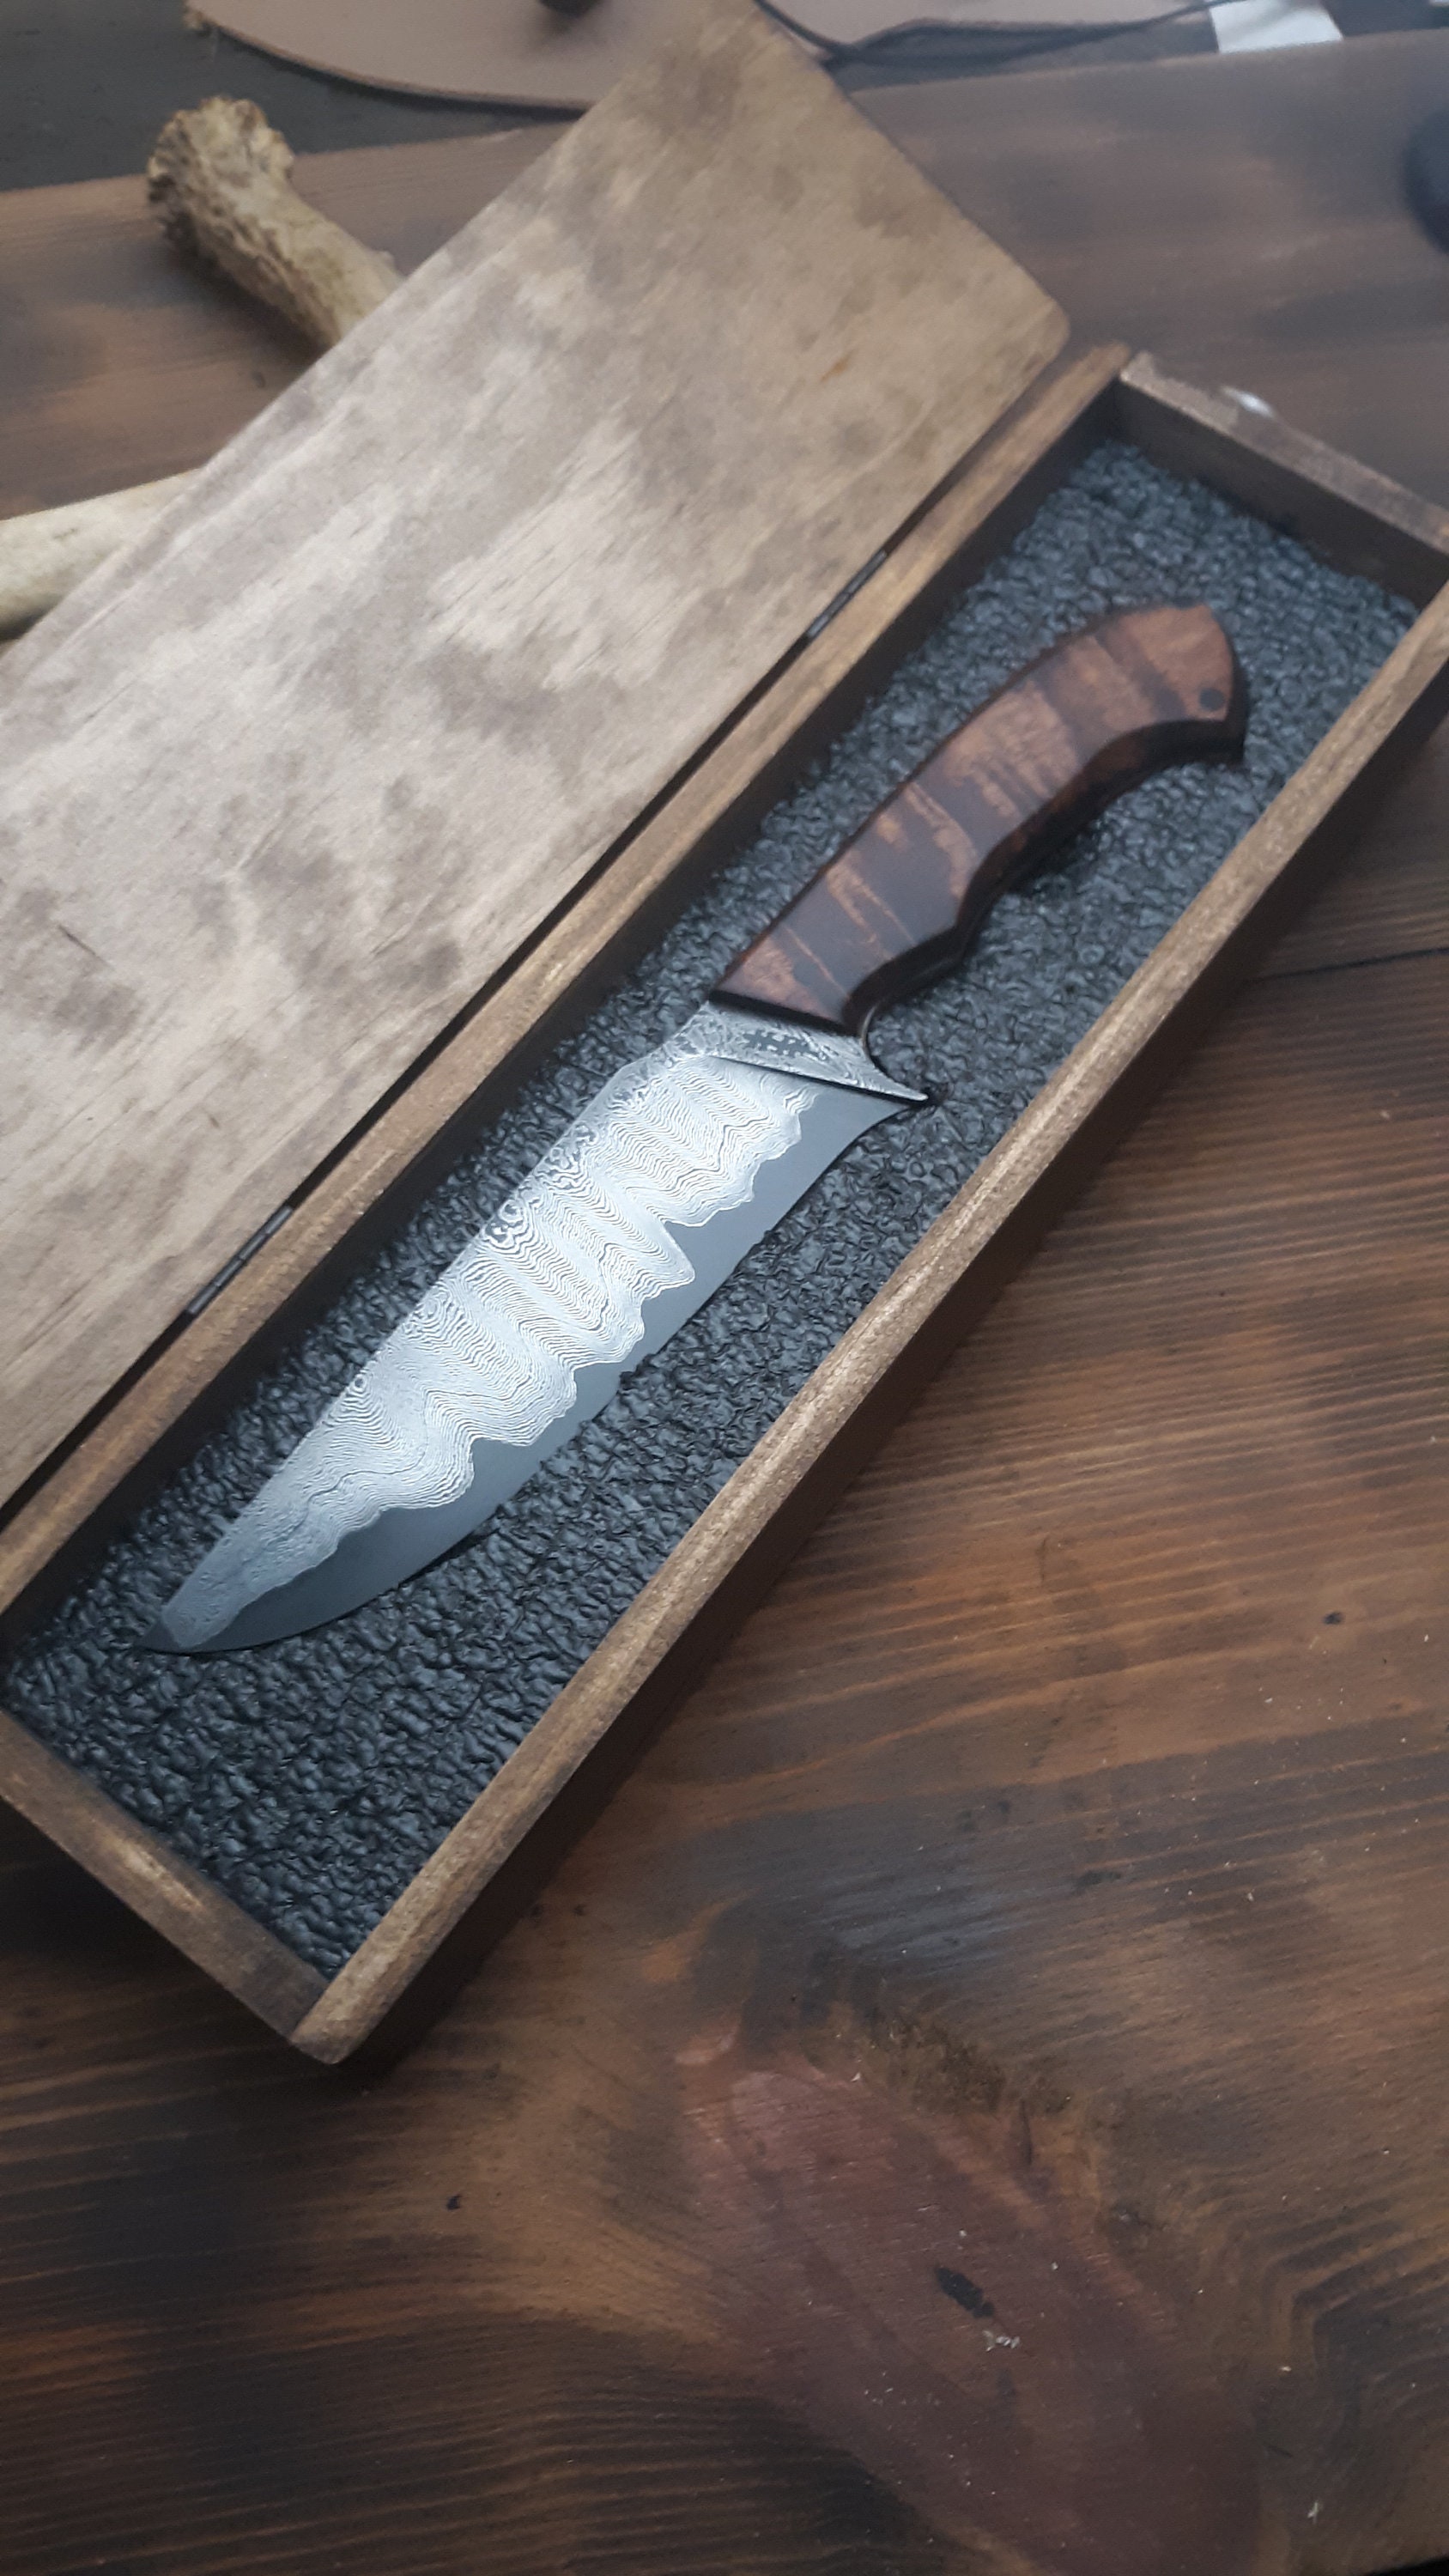 Caveman Style Serbian 2.0 Knife (Limited Edition)Hand forgend San Mai Steel  7in, with Hunter Holster & Mini Sharpening Stone. – The Cavemanstyle